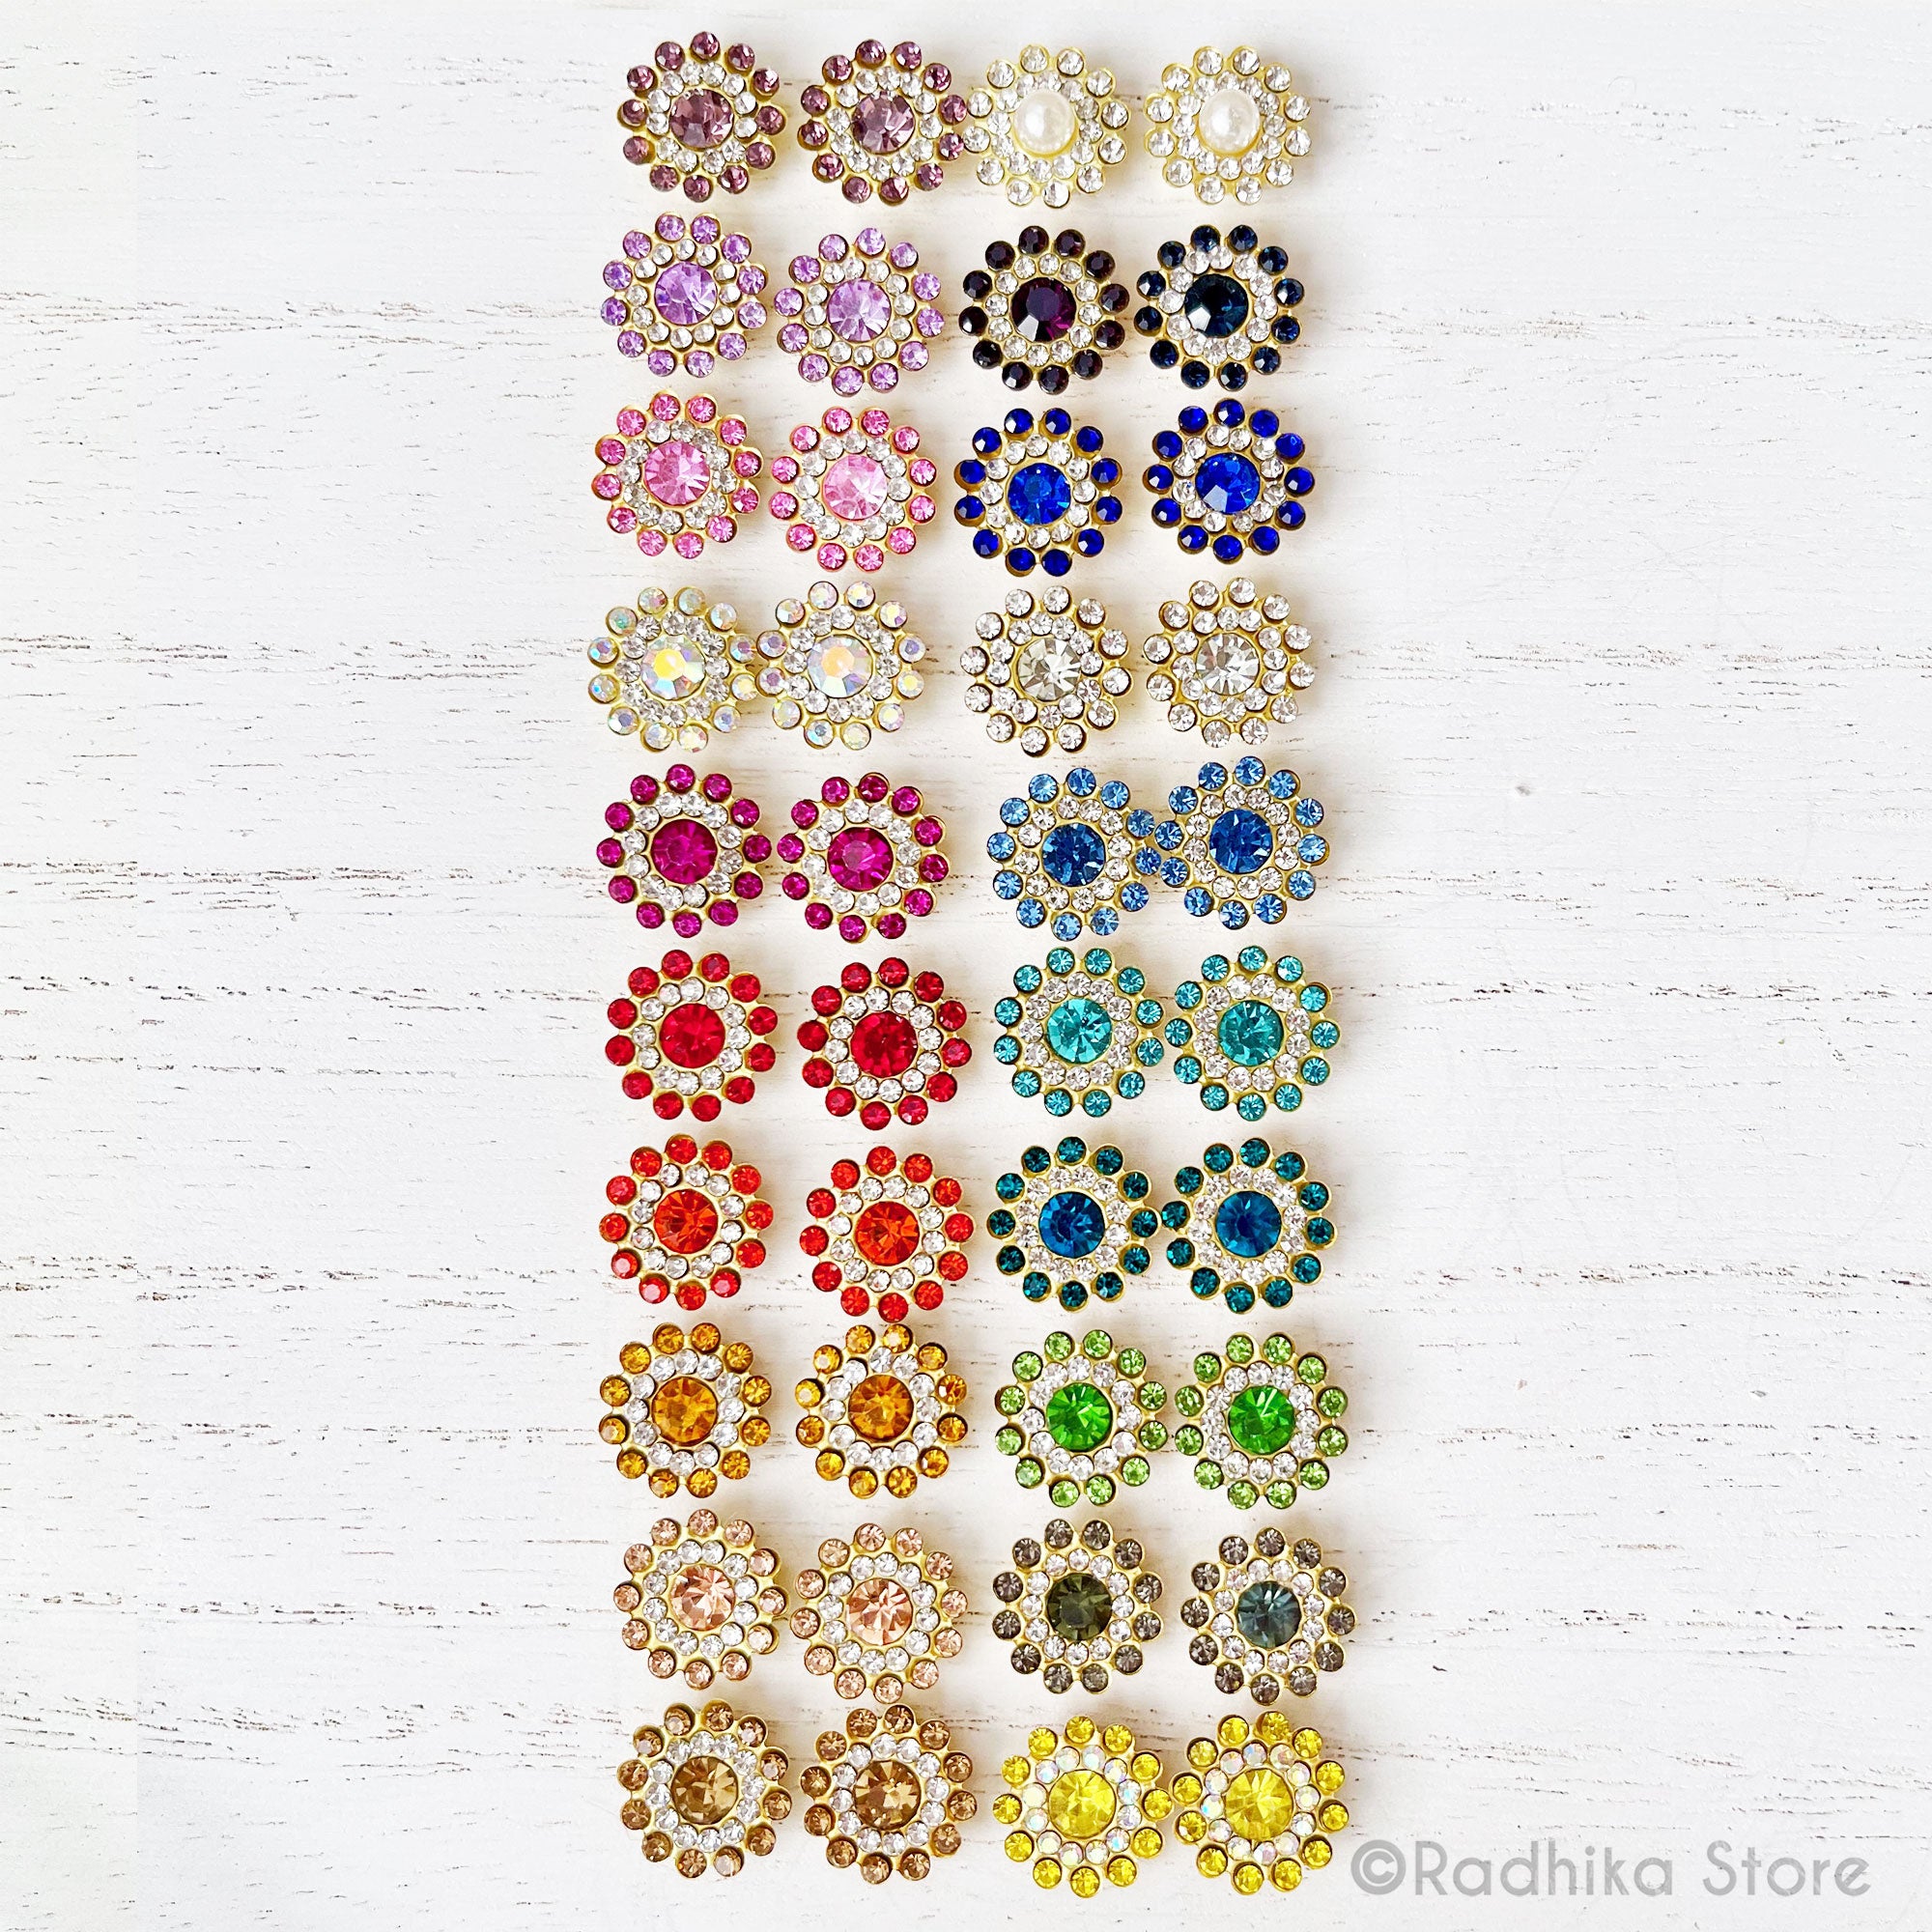 Details more than 123 simple one stone earrings